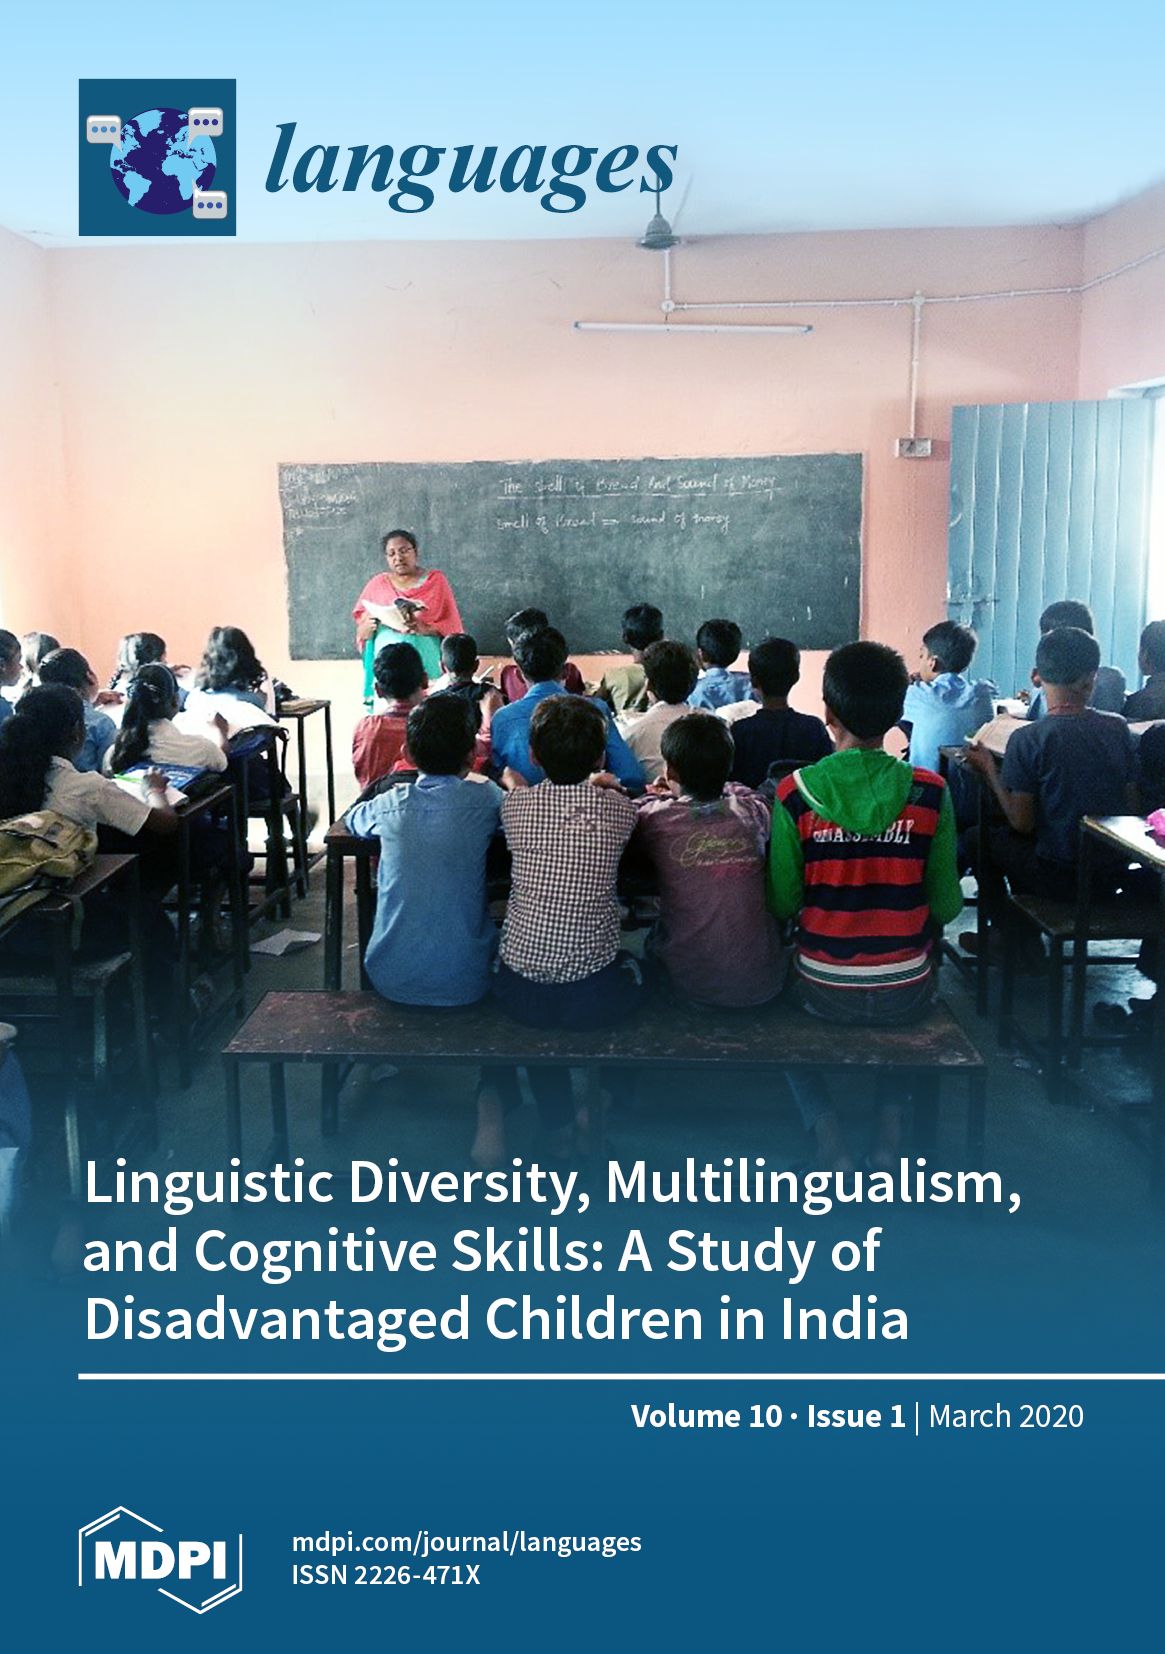 Our recent publication chosen as the cover of the journal "Languages"